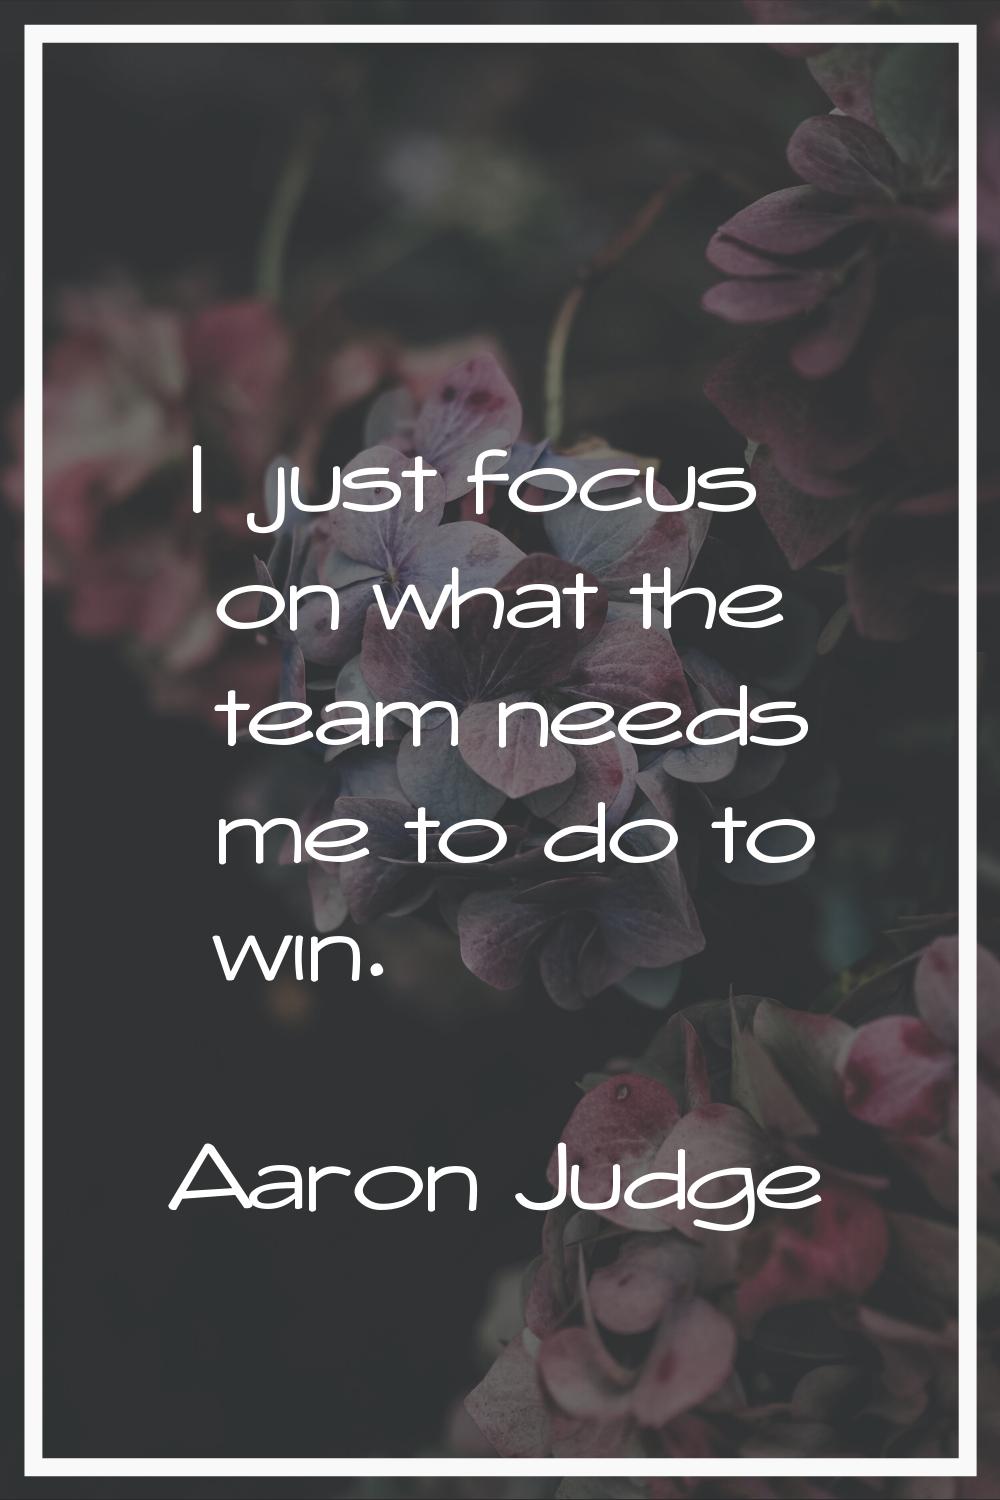 I just focus on what the team needs me to do to win.